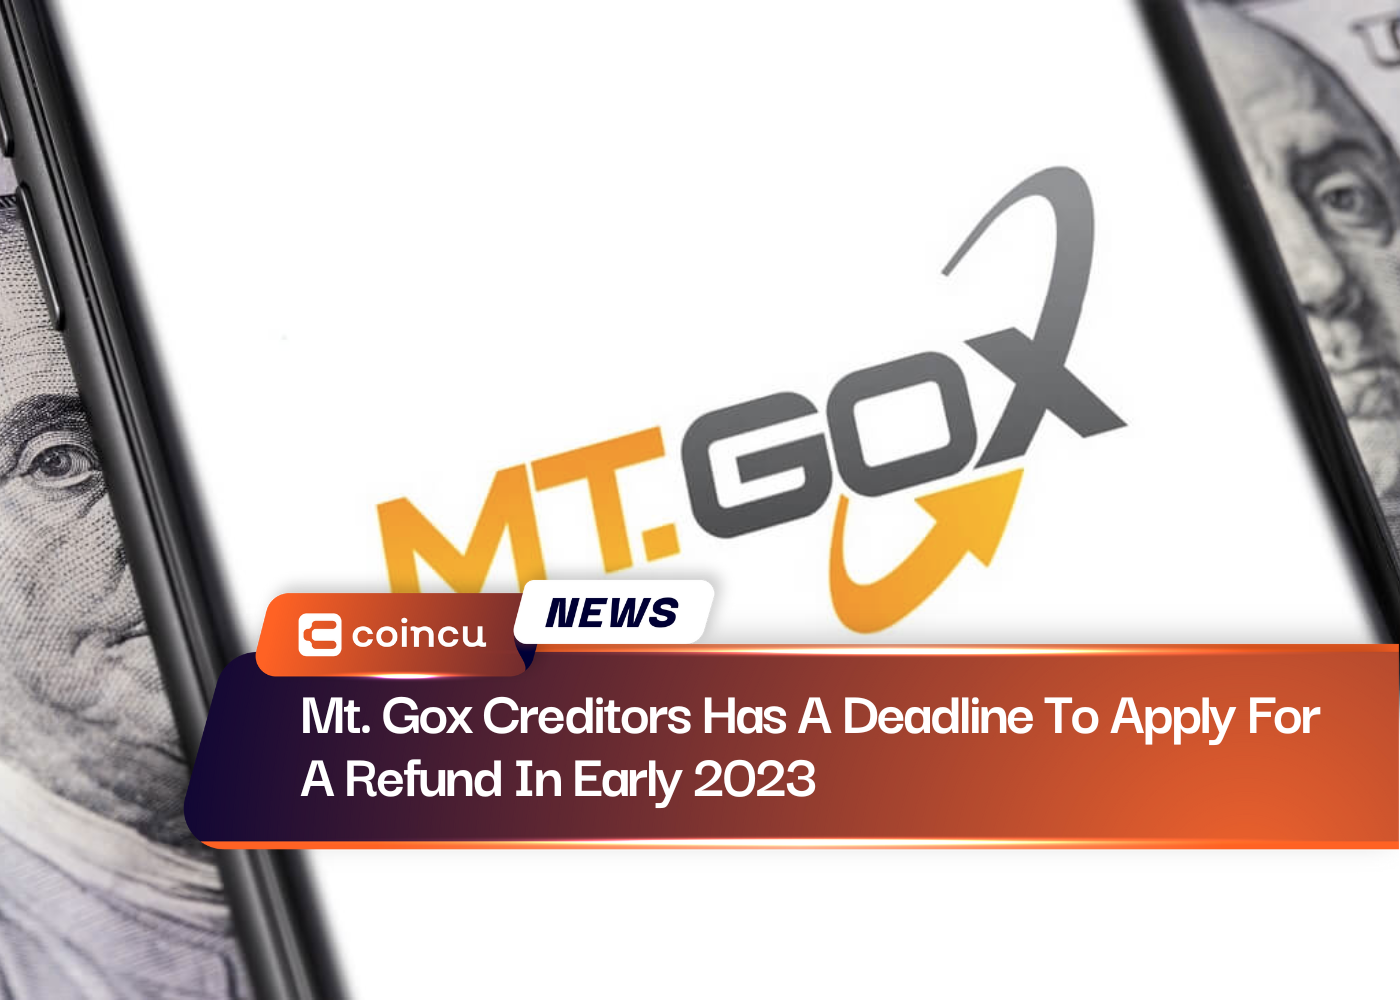 Mt. Gox Creditors Has A Deadline To Apply For A Refund In Early 2023